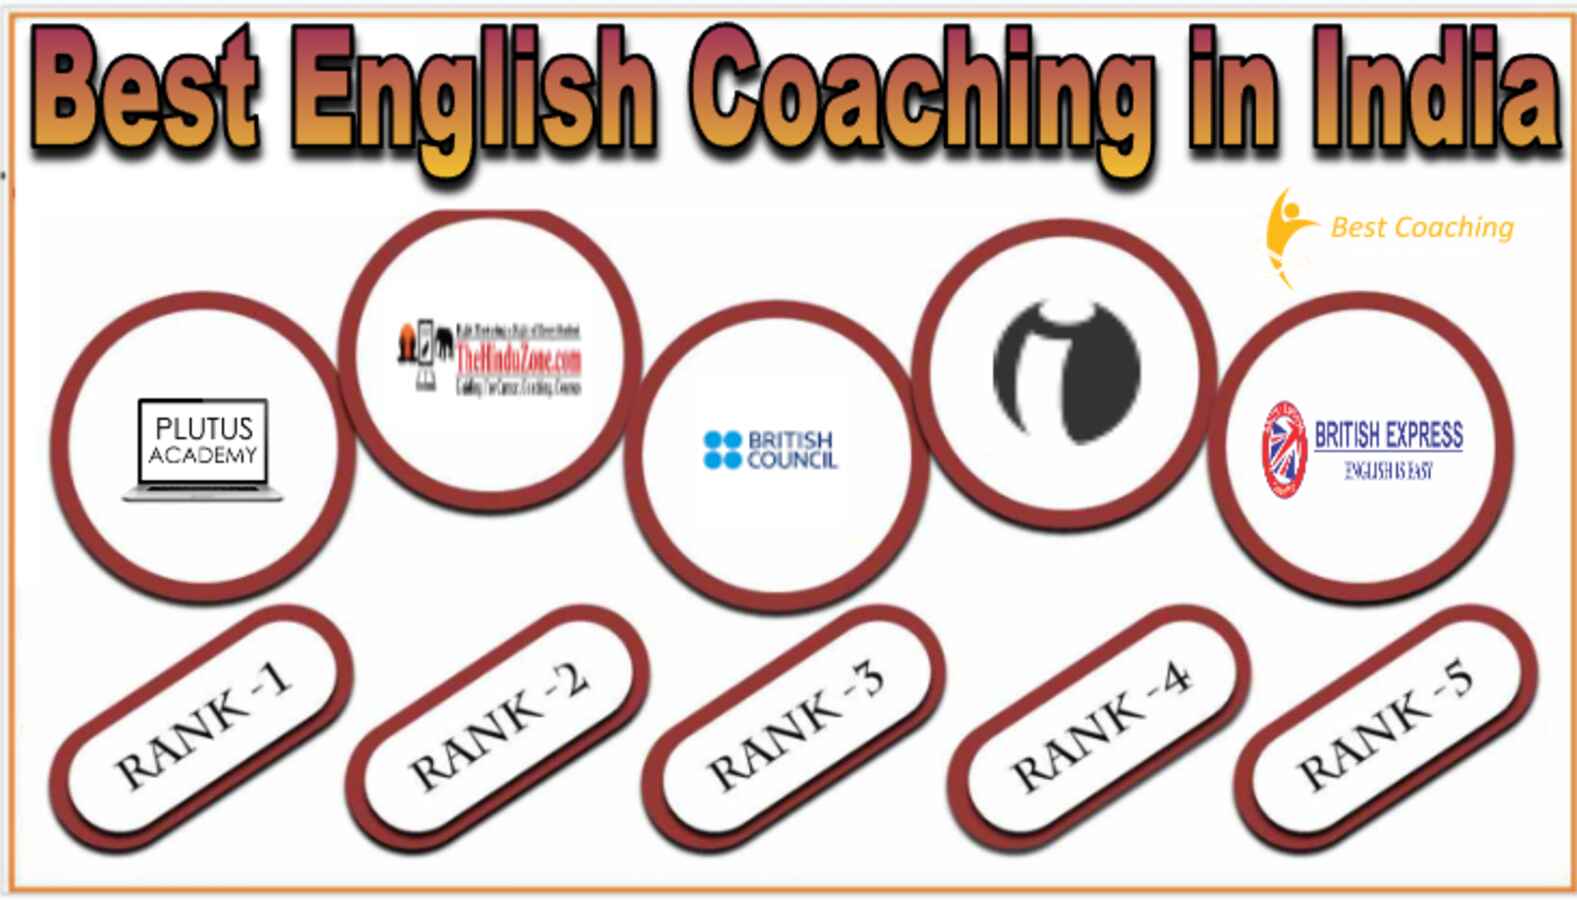 Best English Coaching in India